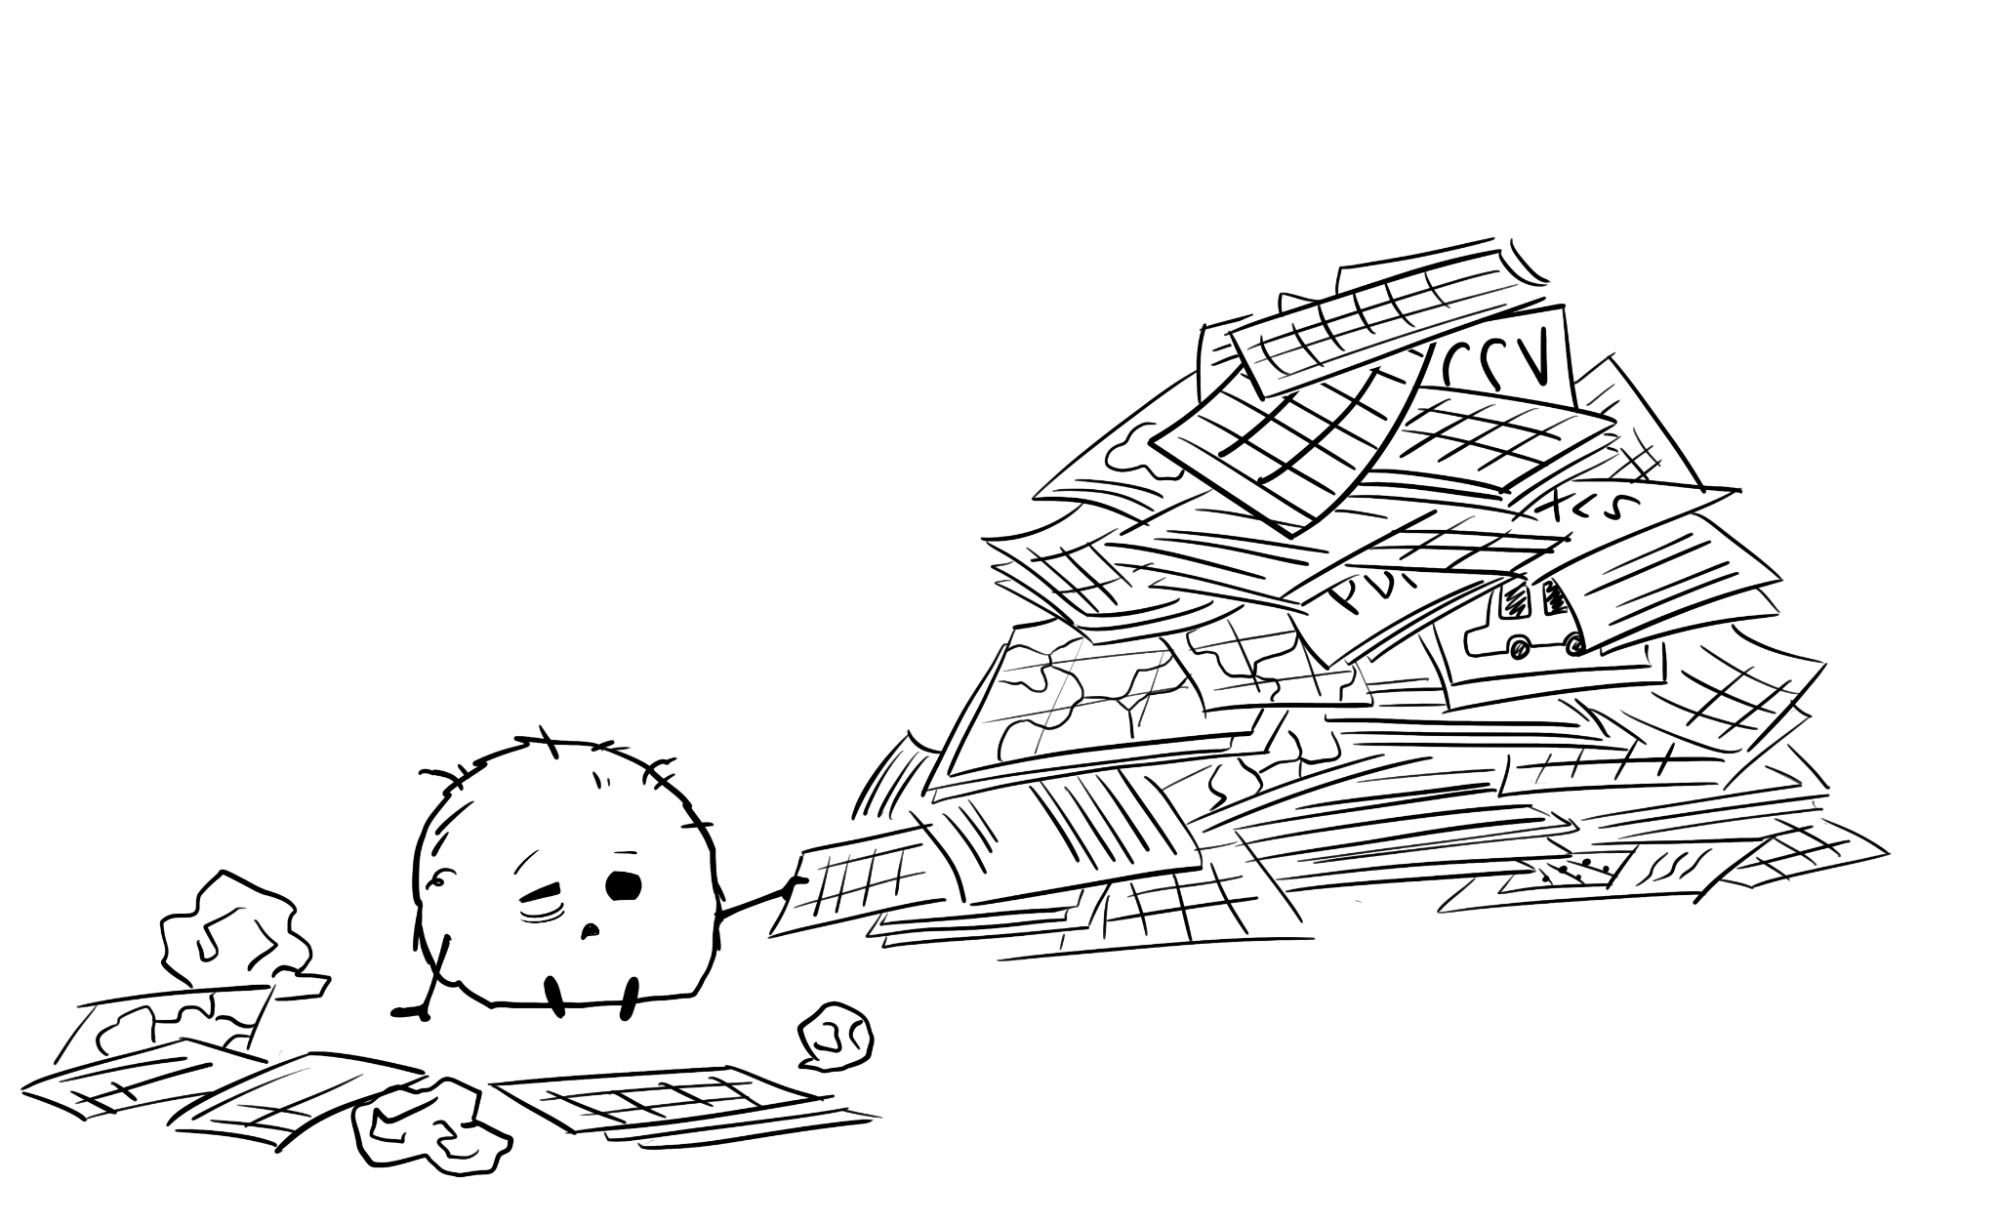 A little monster sorts through a gigantic pile of datasets. 